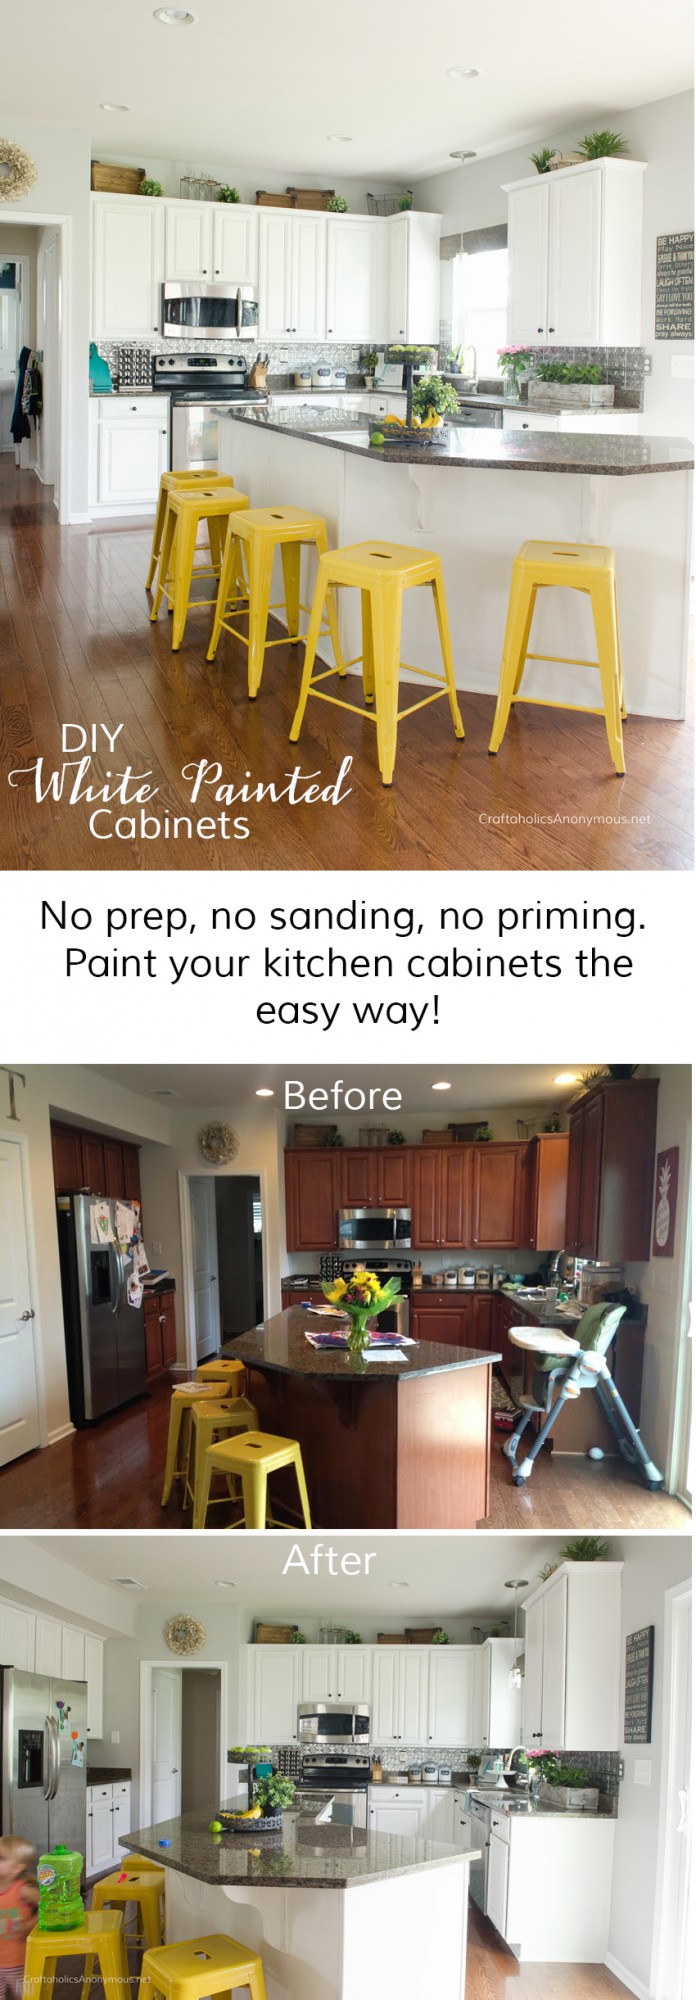 Craftaholics Anonymous How To Paint Kitchen Cabinets With Chalk Paint